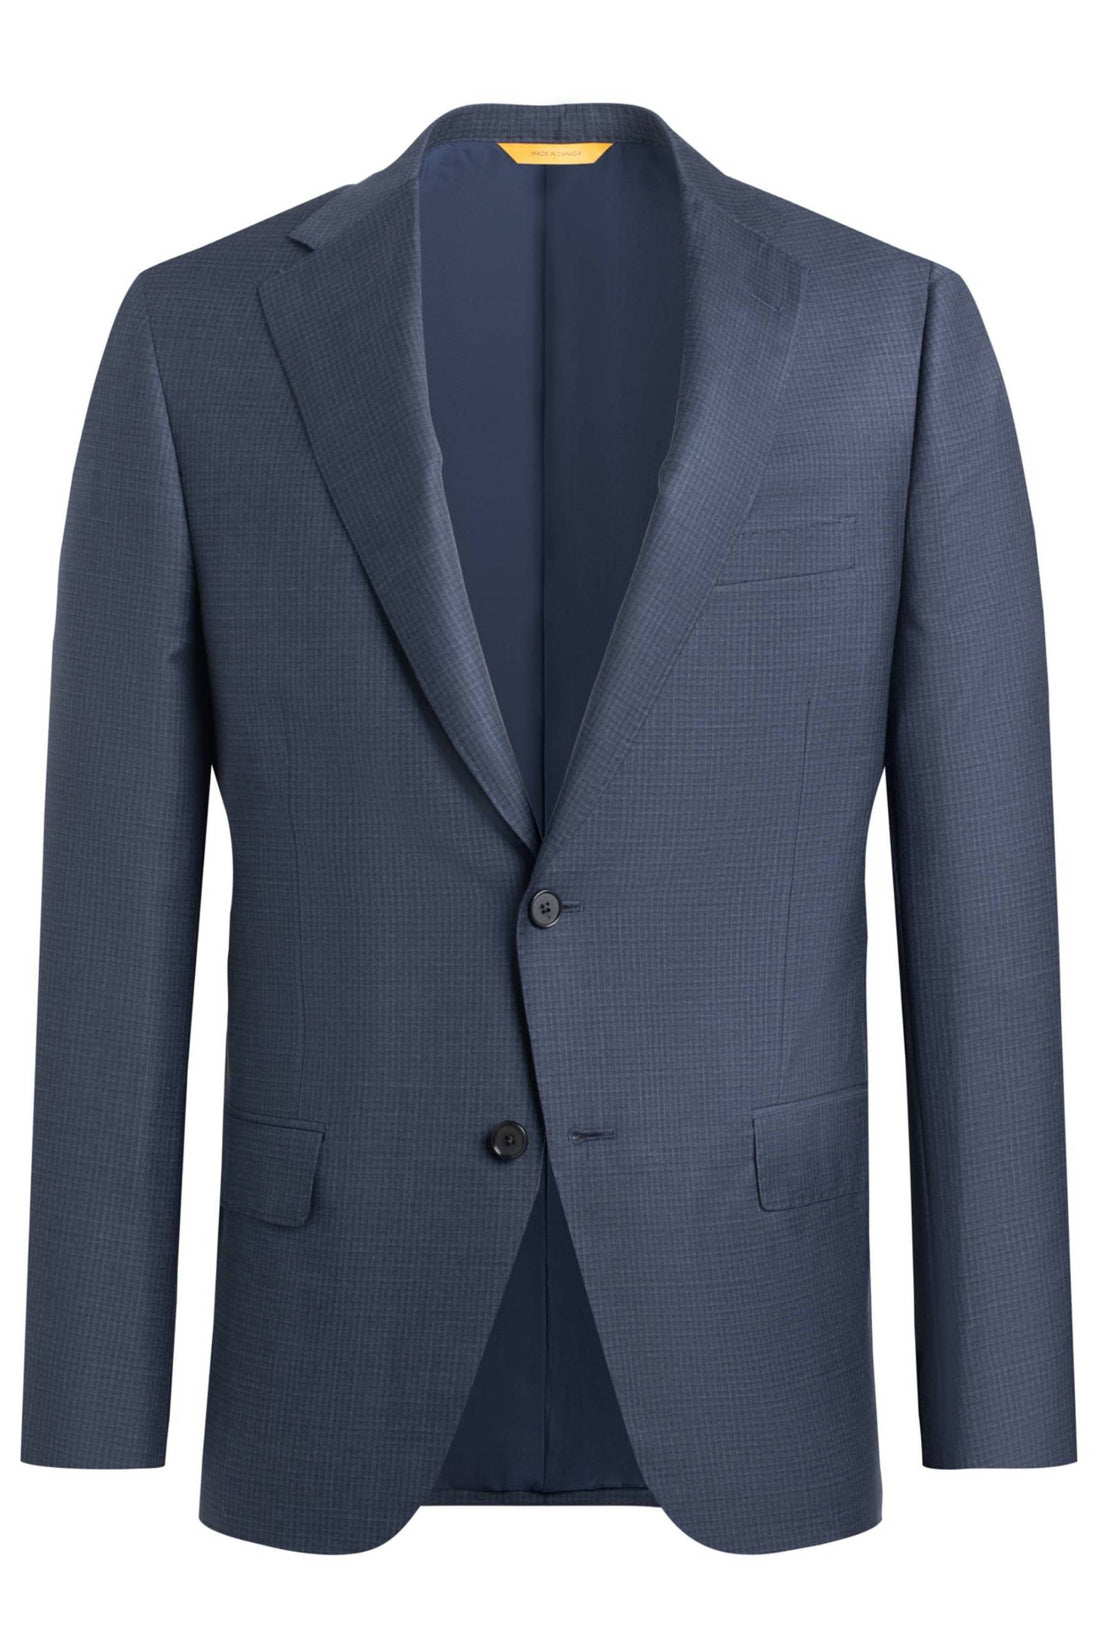 Heritage Gold Blue Super 150s Microcheck Suit Front Jacket